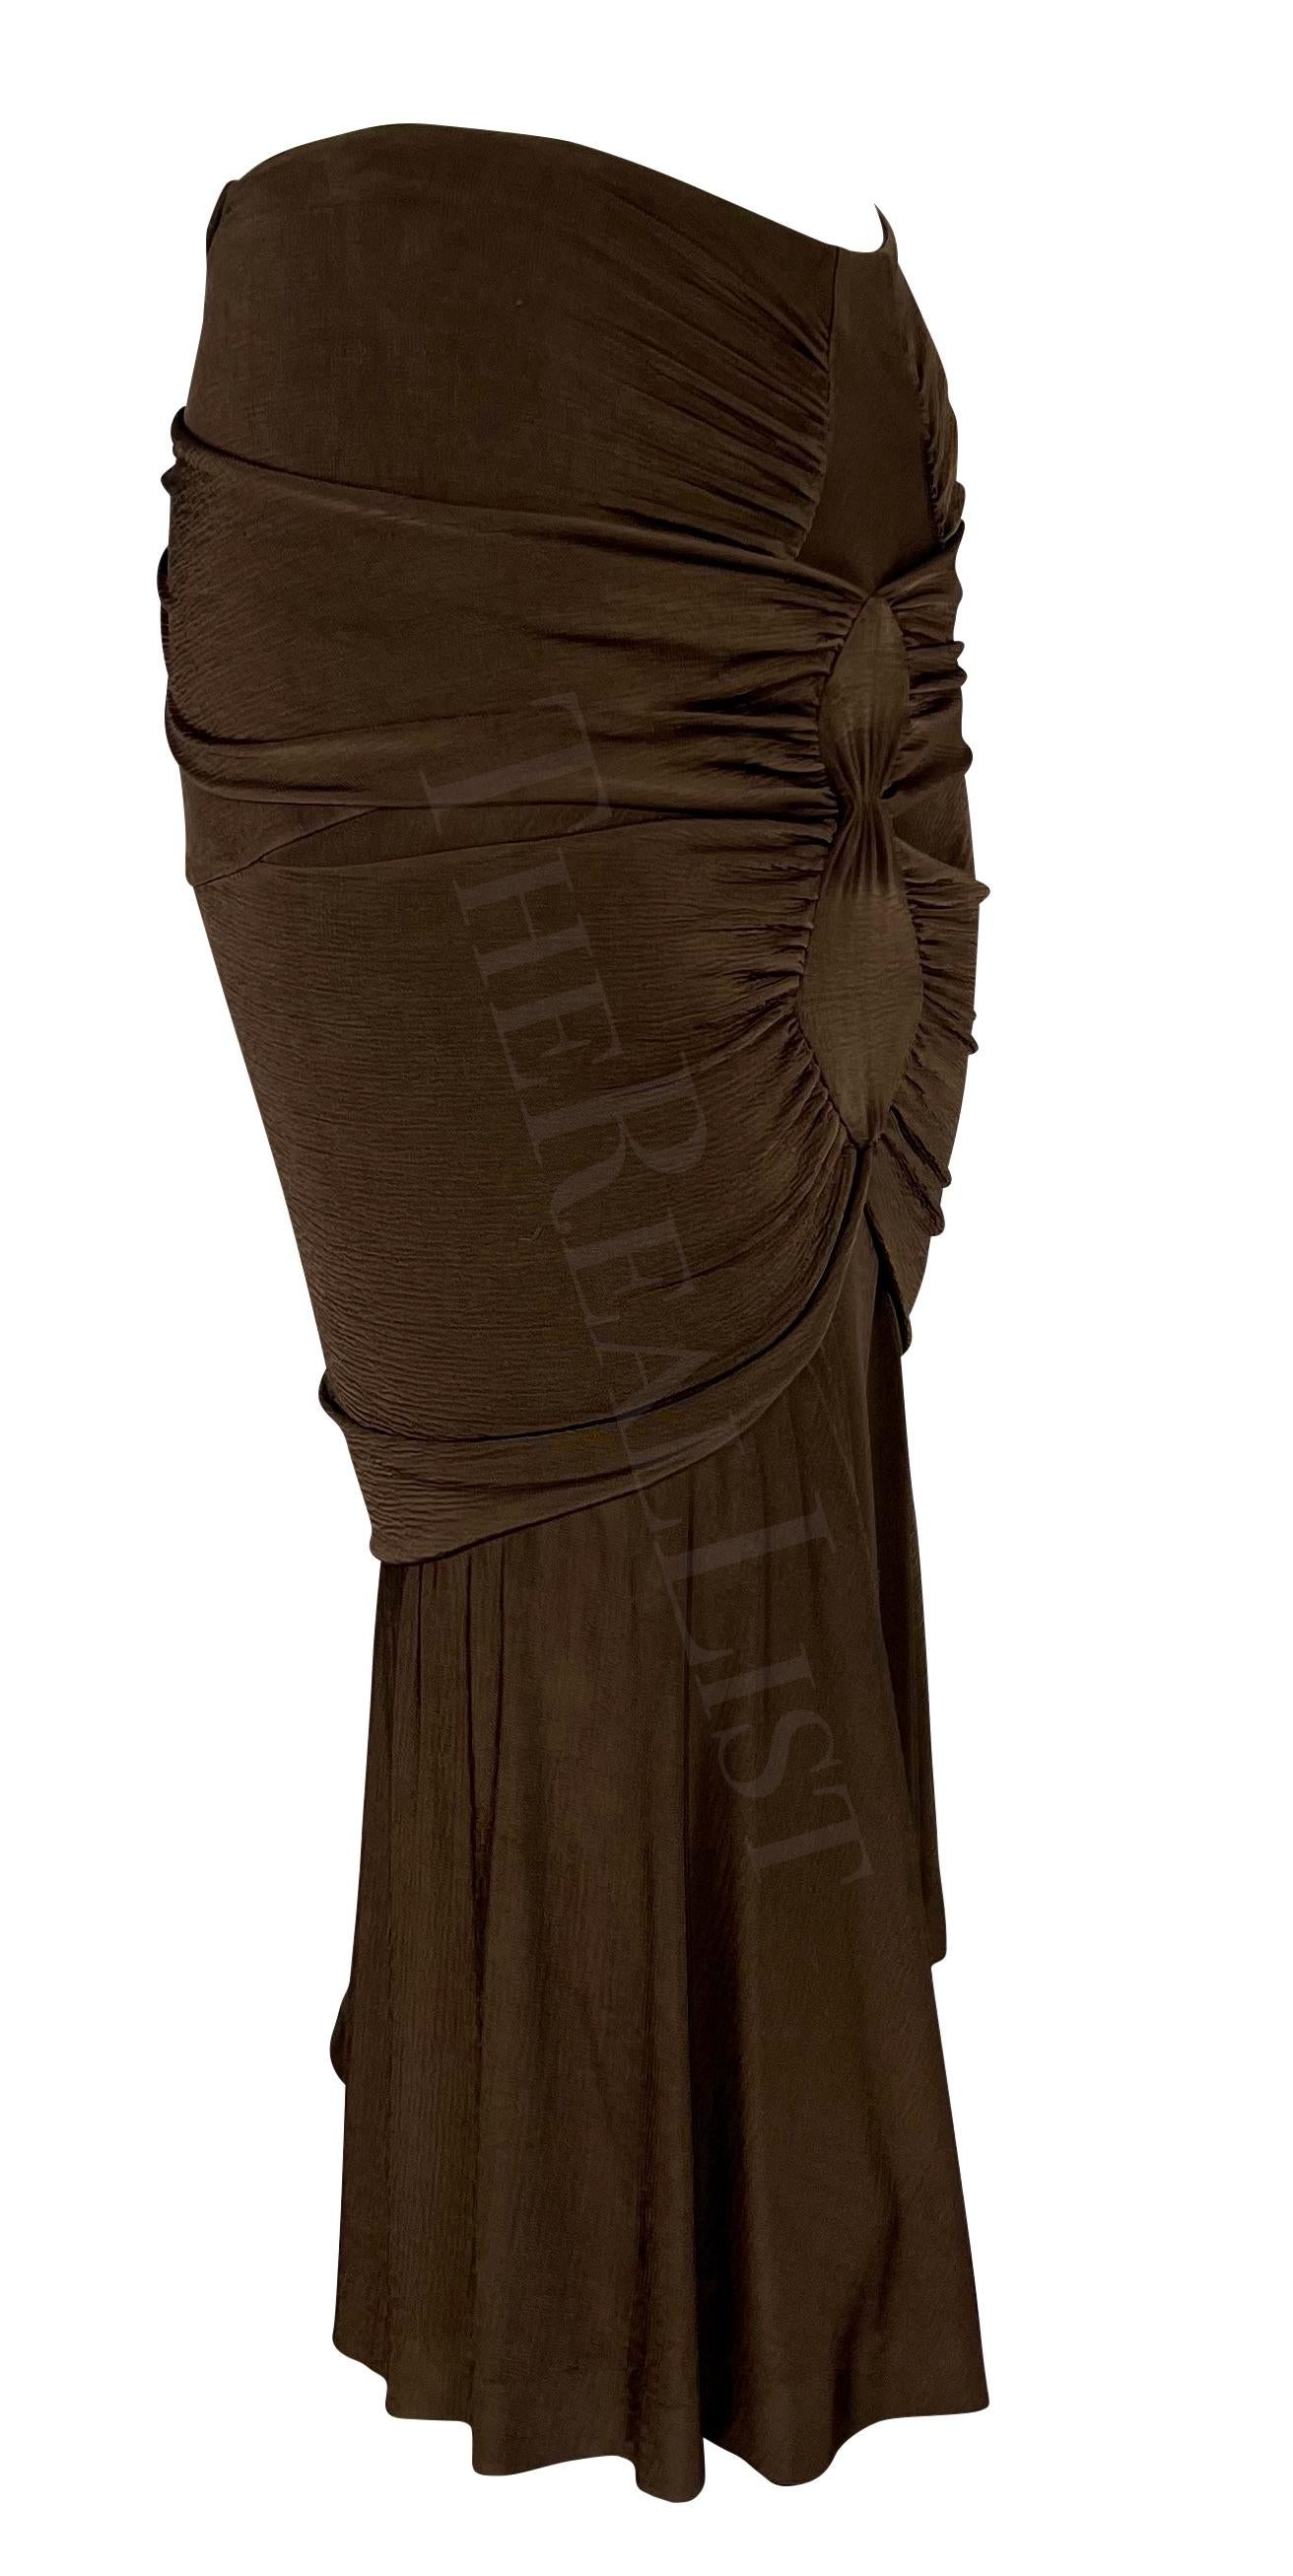 S/S 2003 Yves Saint Laurent by Tom Ford Runway Brown Ruched Slinky Skirt For Sale 6